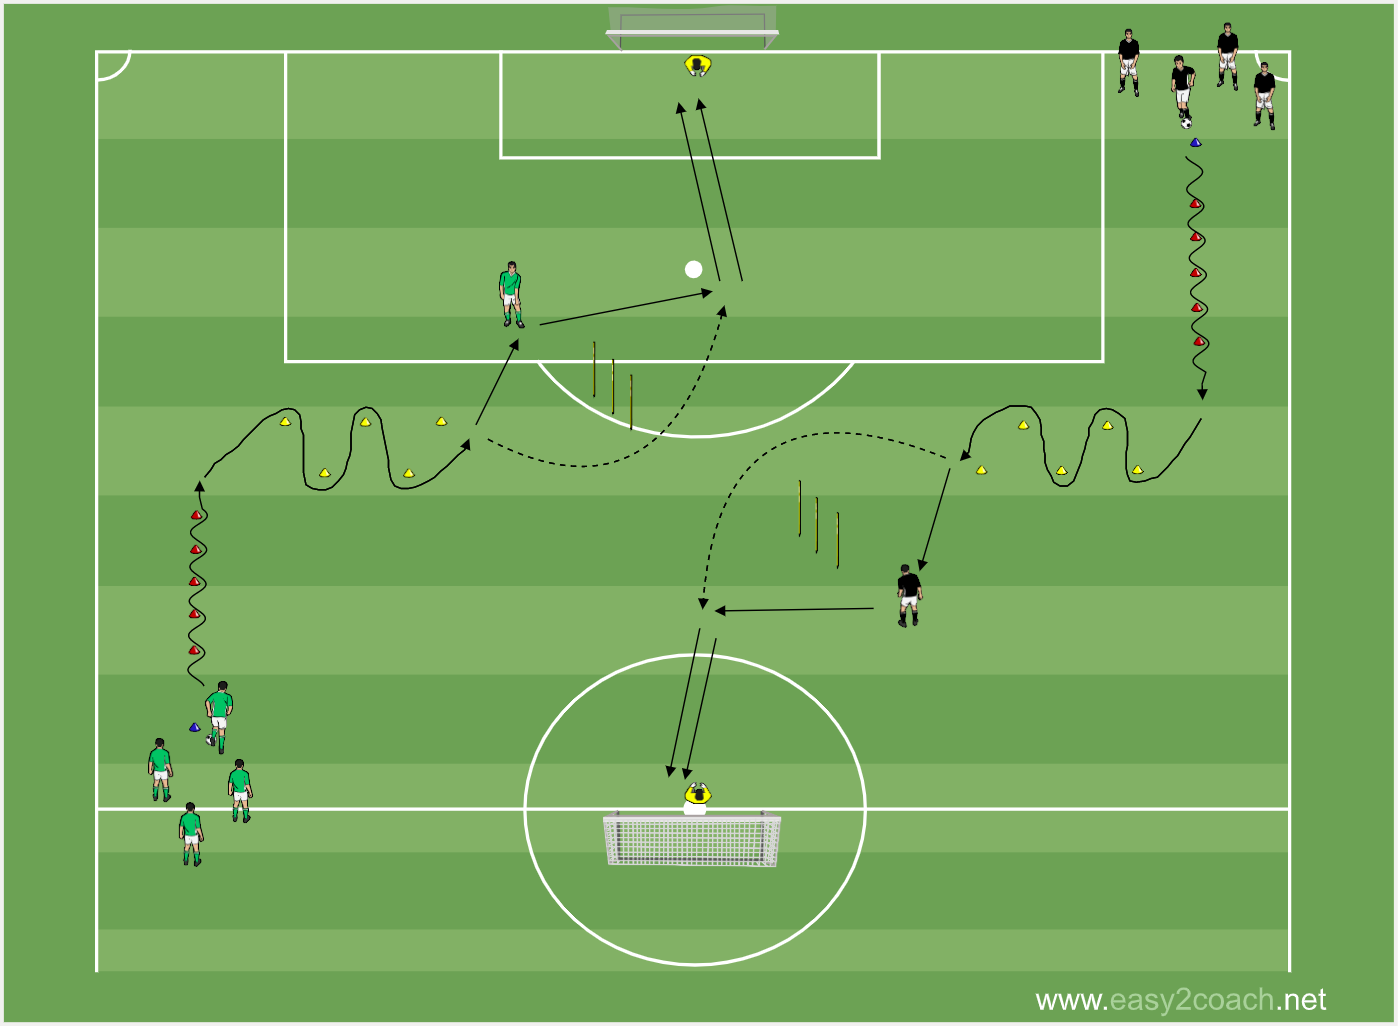 DRIBBLING_PARCOURS_WETTBEWERB.png